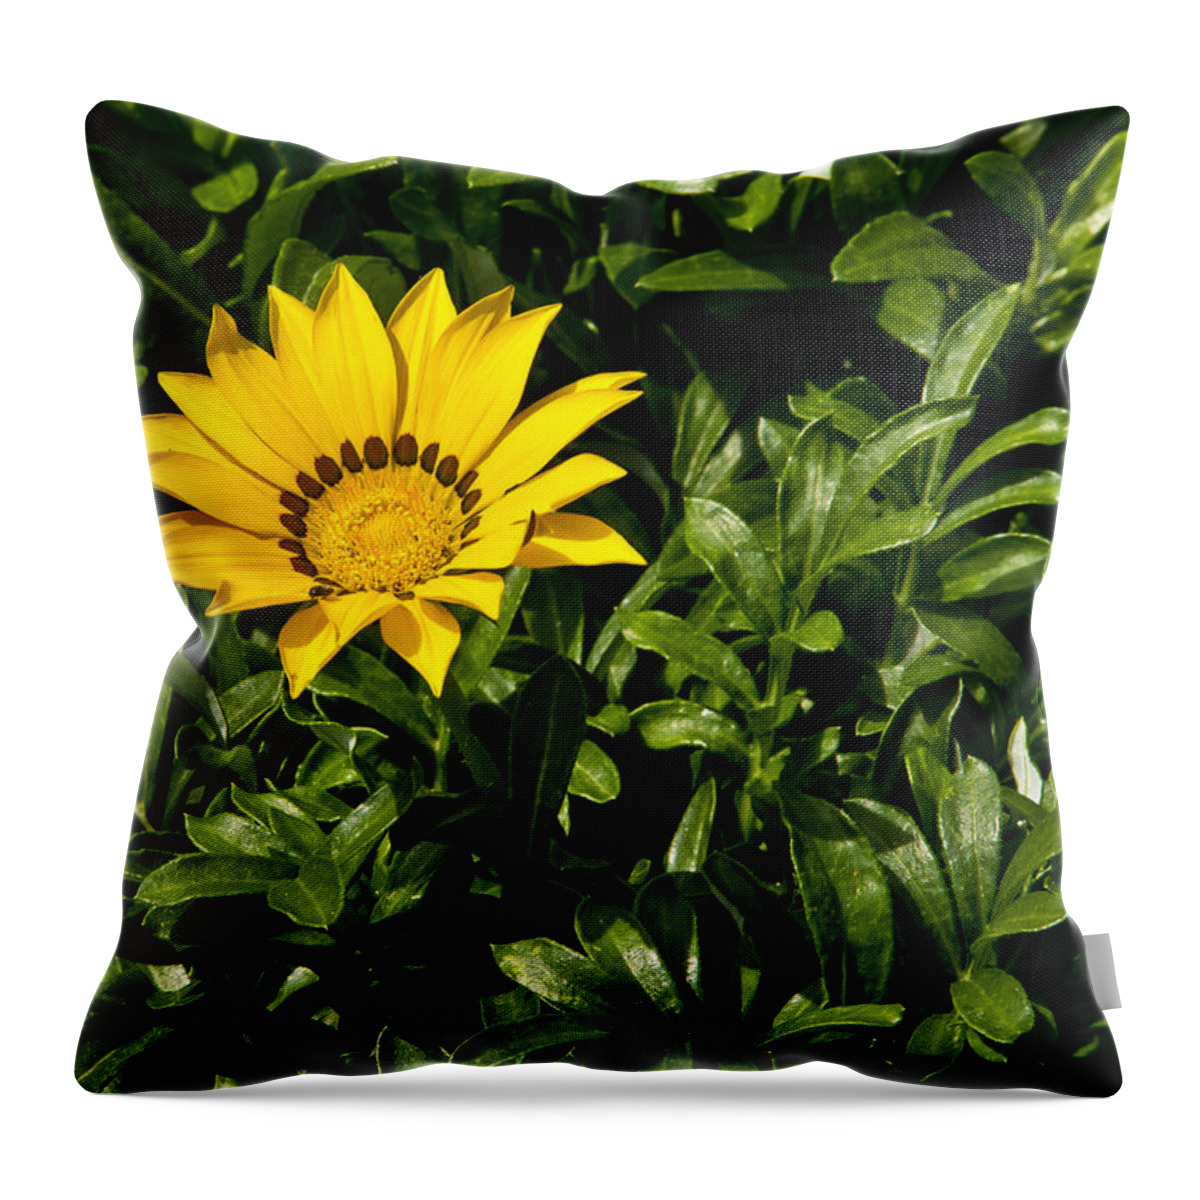 Garden Throw Pillow featuring the photograph Daisy 1 by Paul Anderson